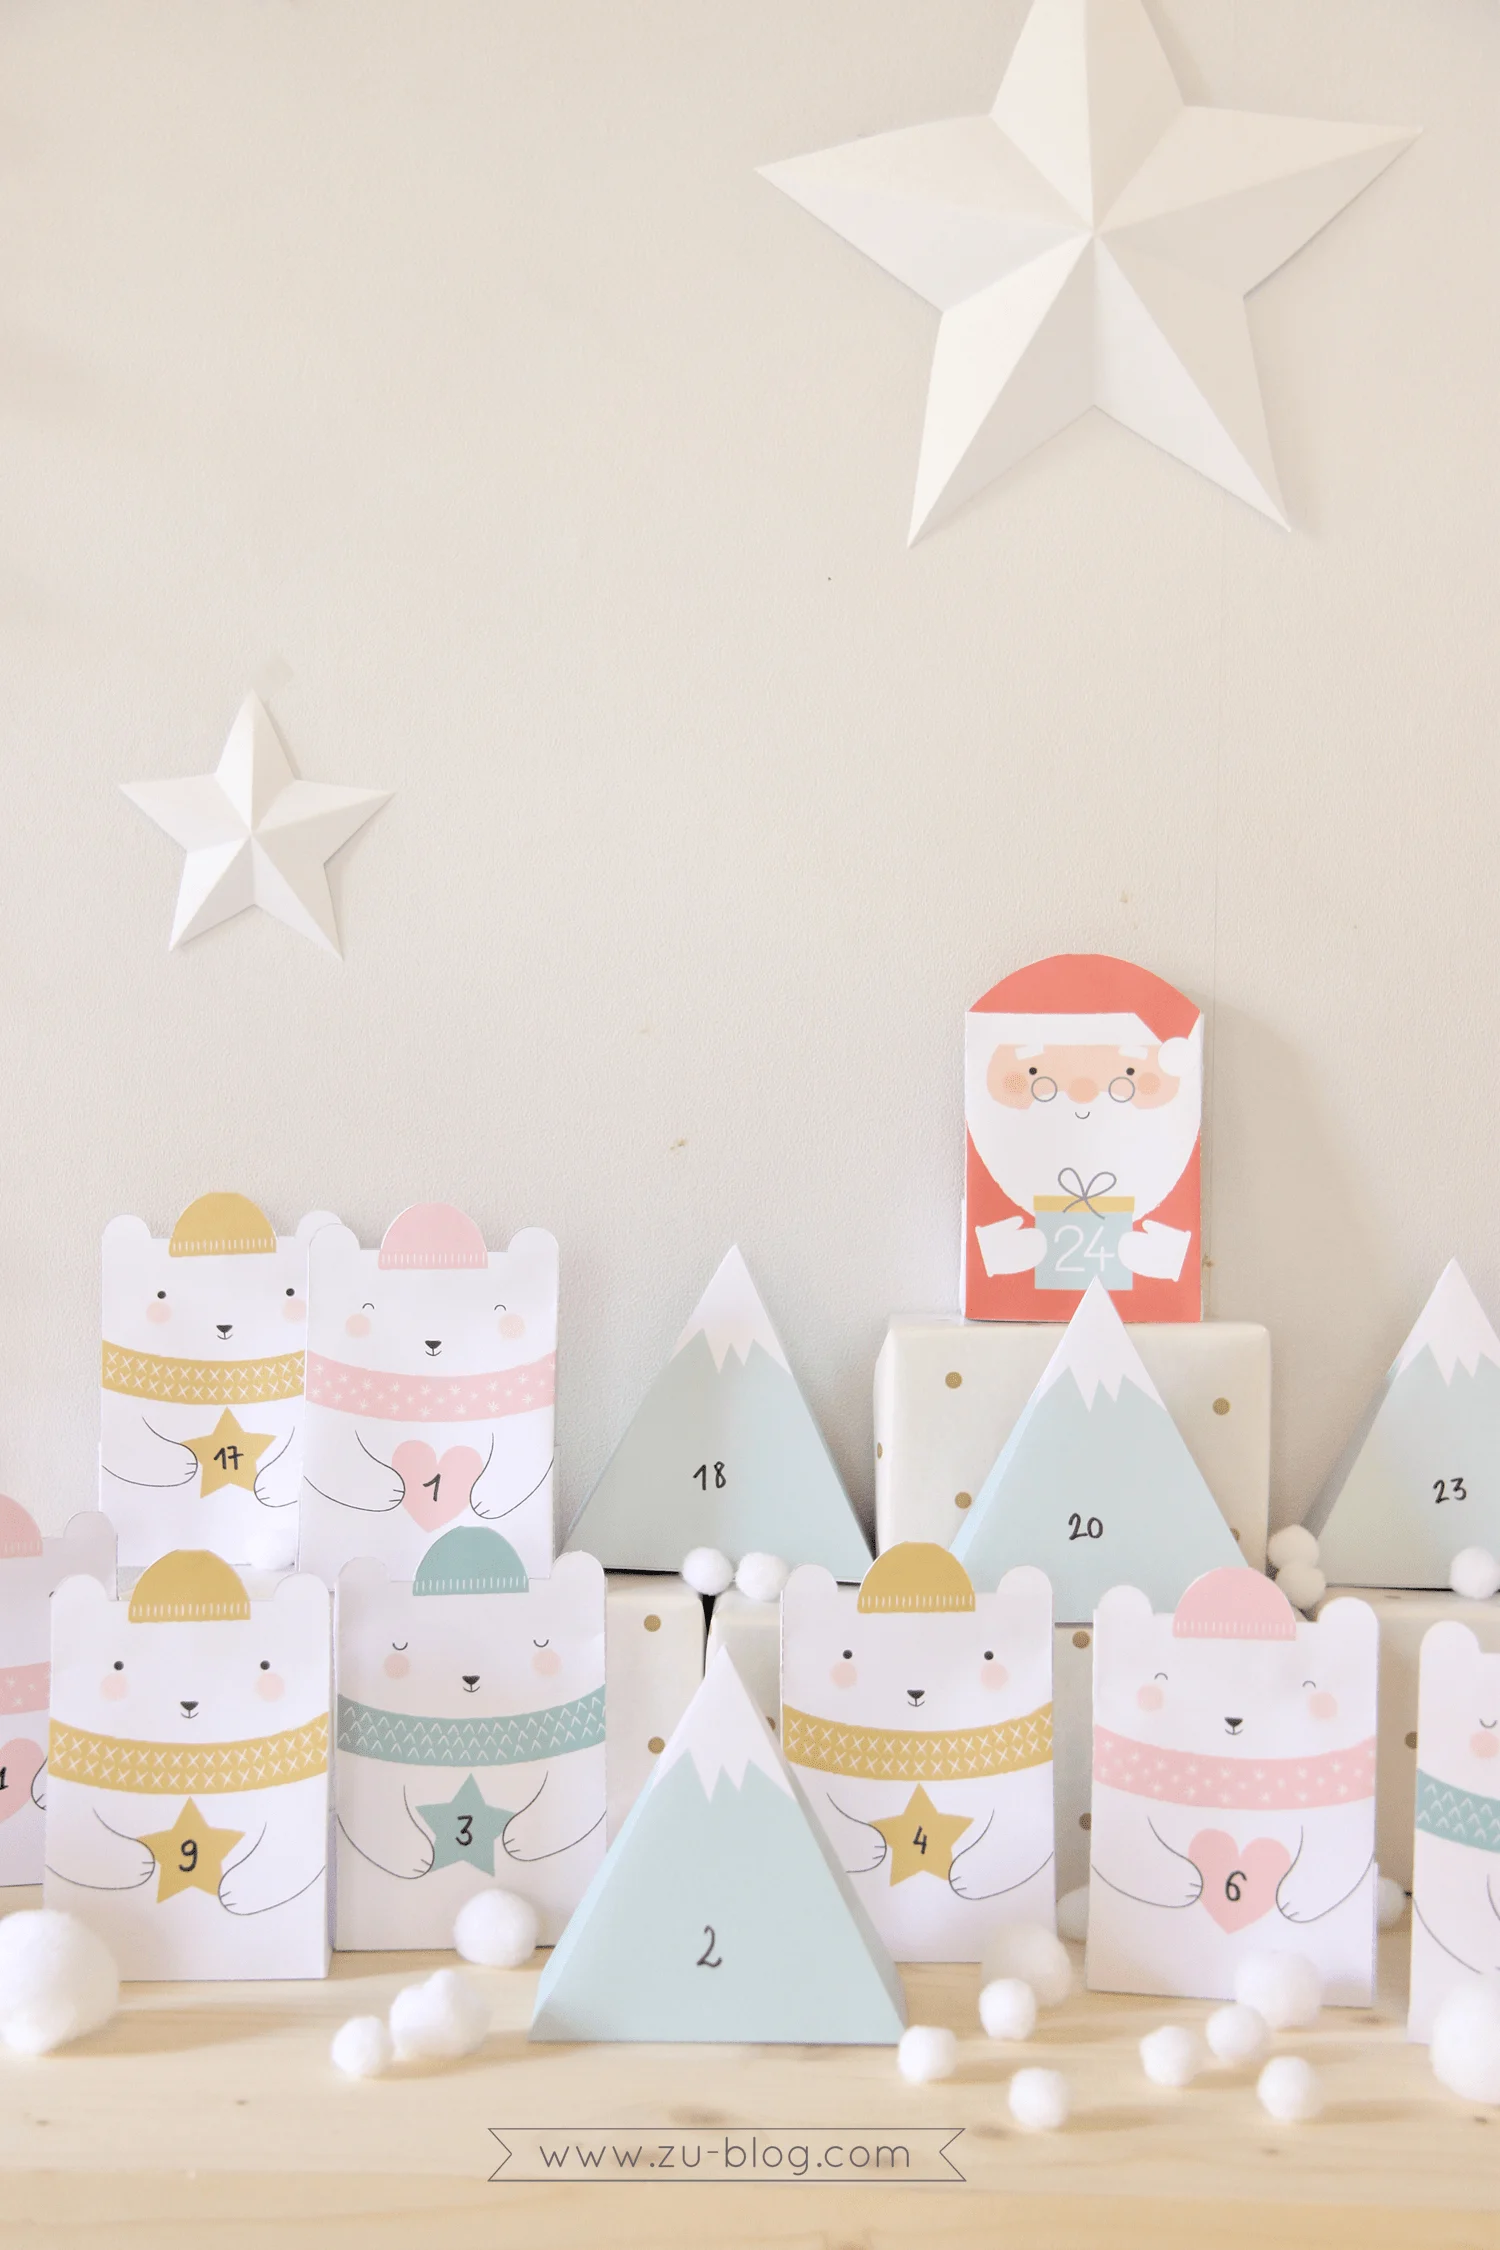 This printable advent calendar is so adorable. Download and print the Santa and bears, then follow the directions on the website for folding. You can also fill the insides with treats before folding shut. Super cute DIY Christmas Countdown idea! #ChristmasCountdown #DIYAdventCalendar #FreePrintable